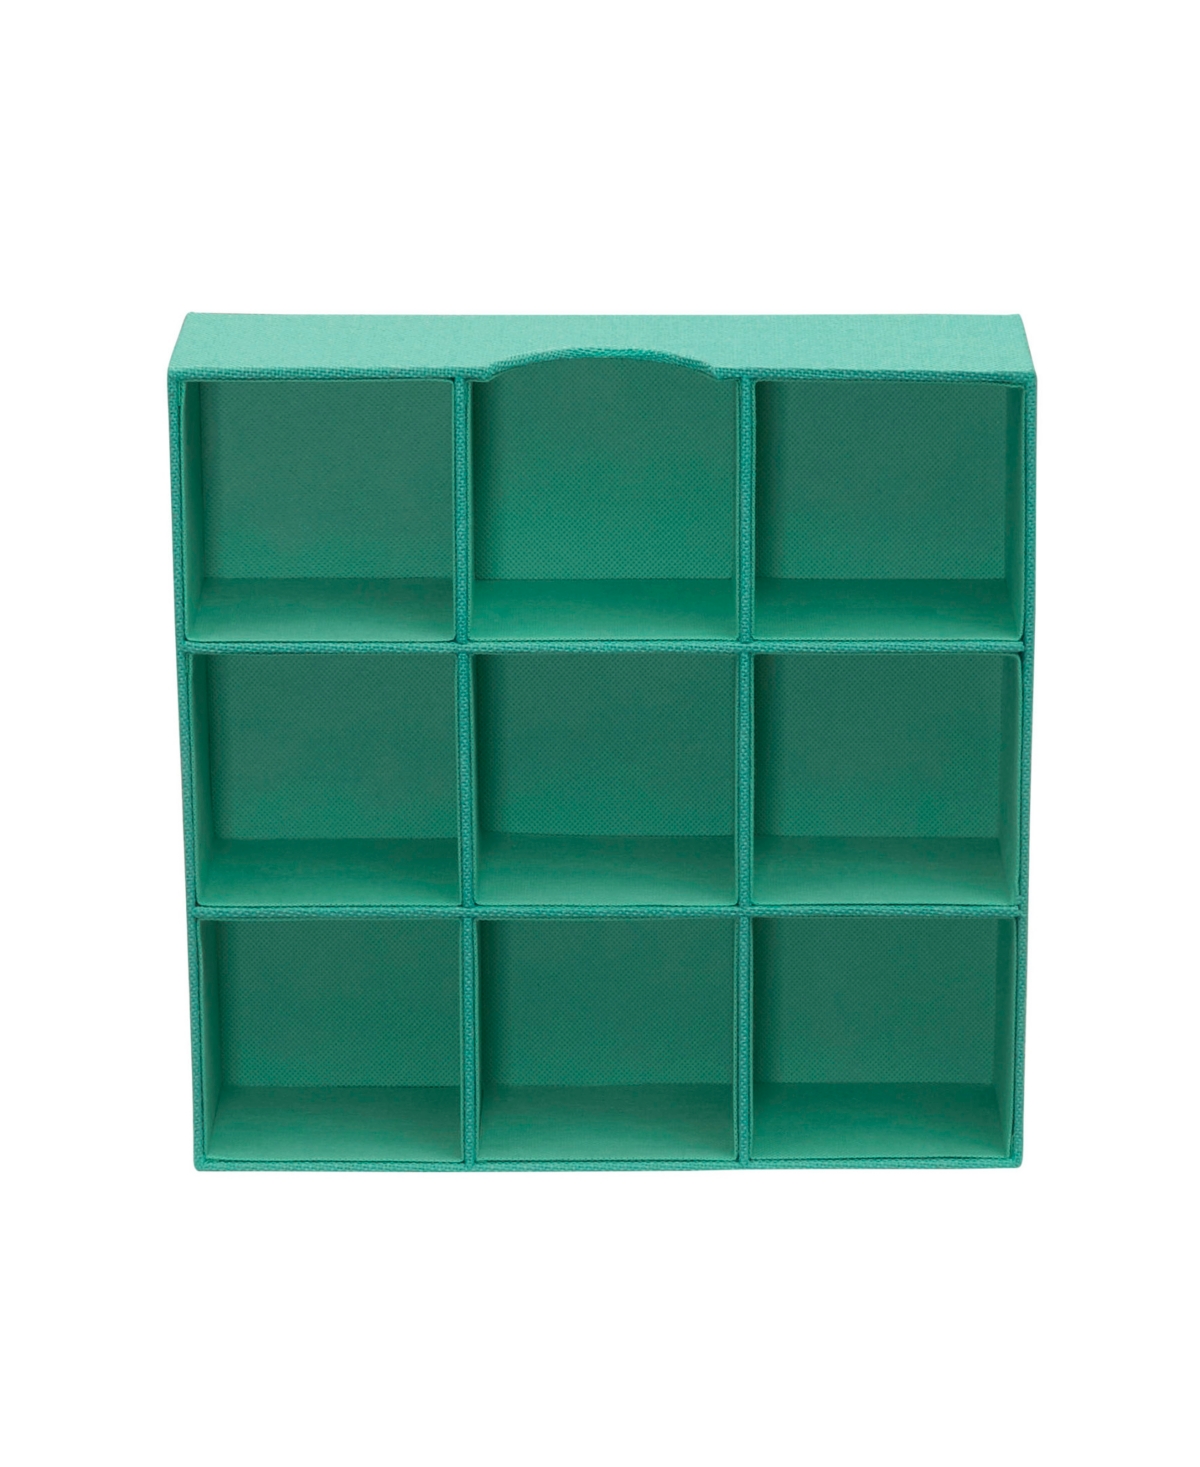 9-Compartment Drawer Organizers Pack of 2 - Green